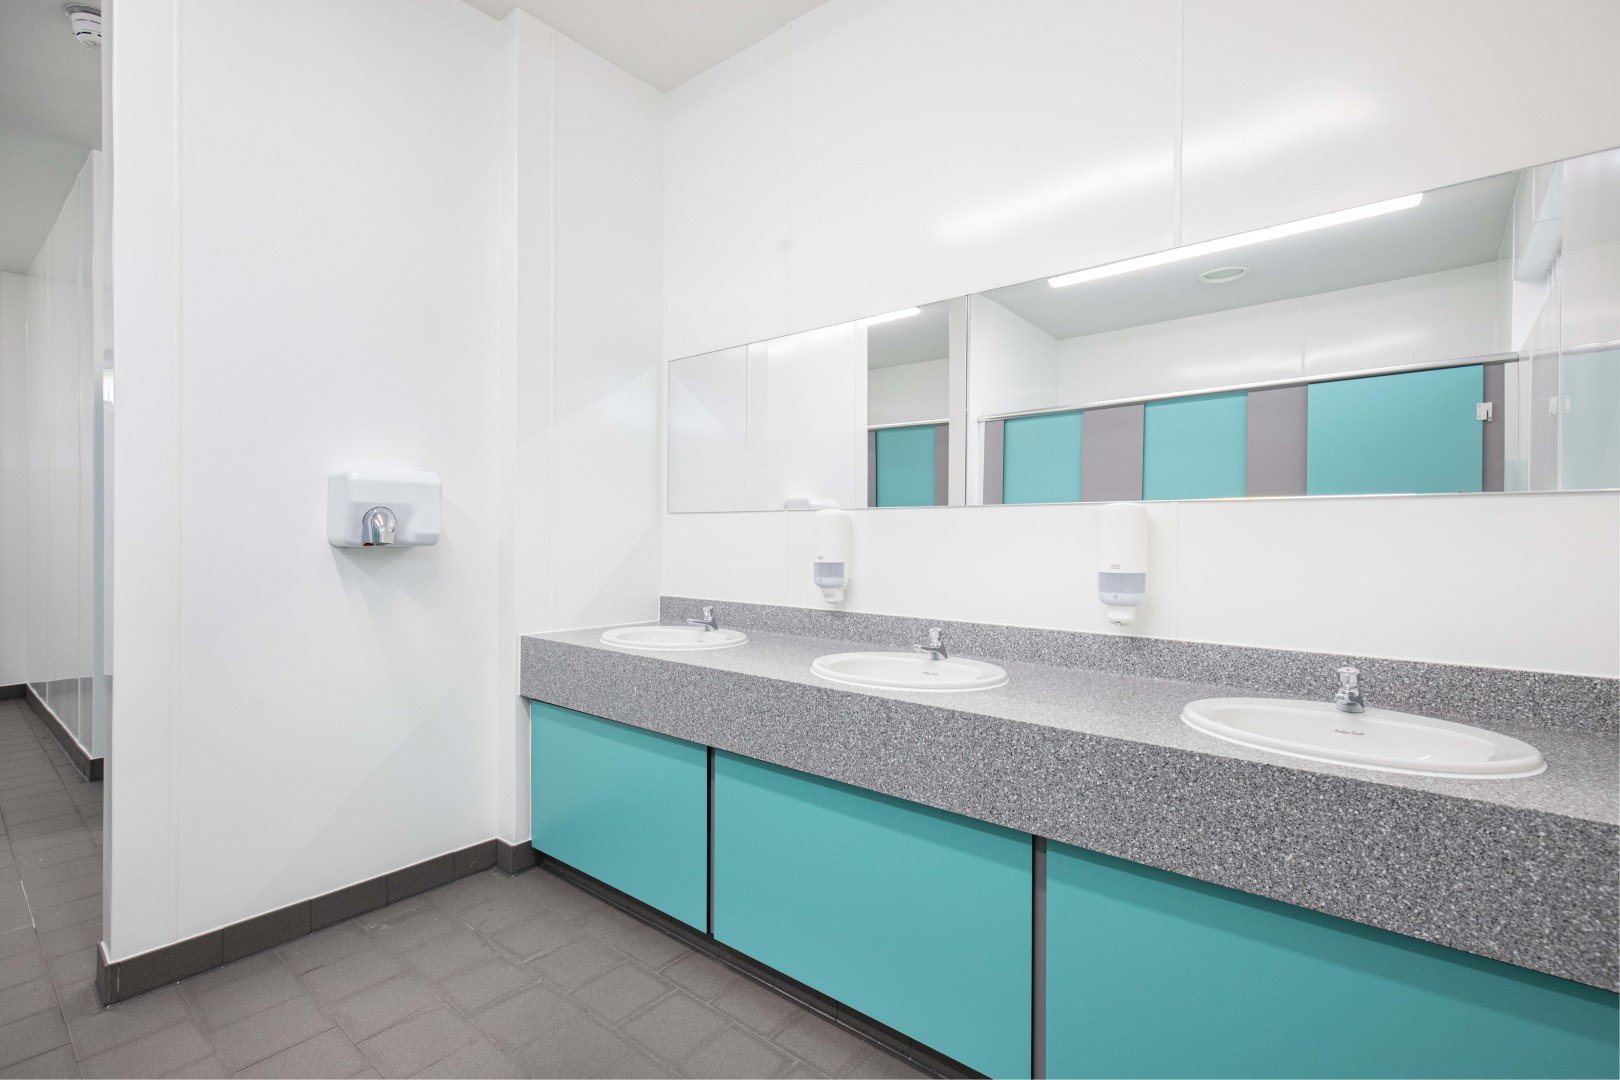 blue vanity unit with solid surface top and inset sinks in washroom at riverside campsite.jpg